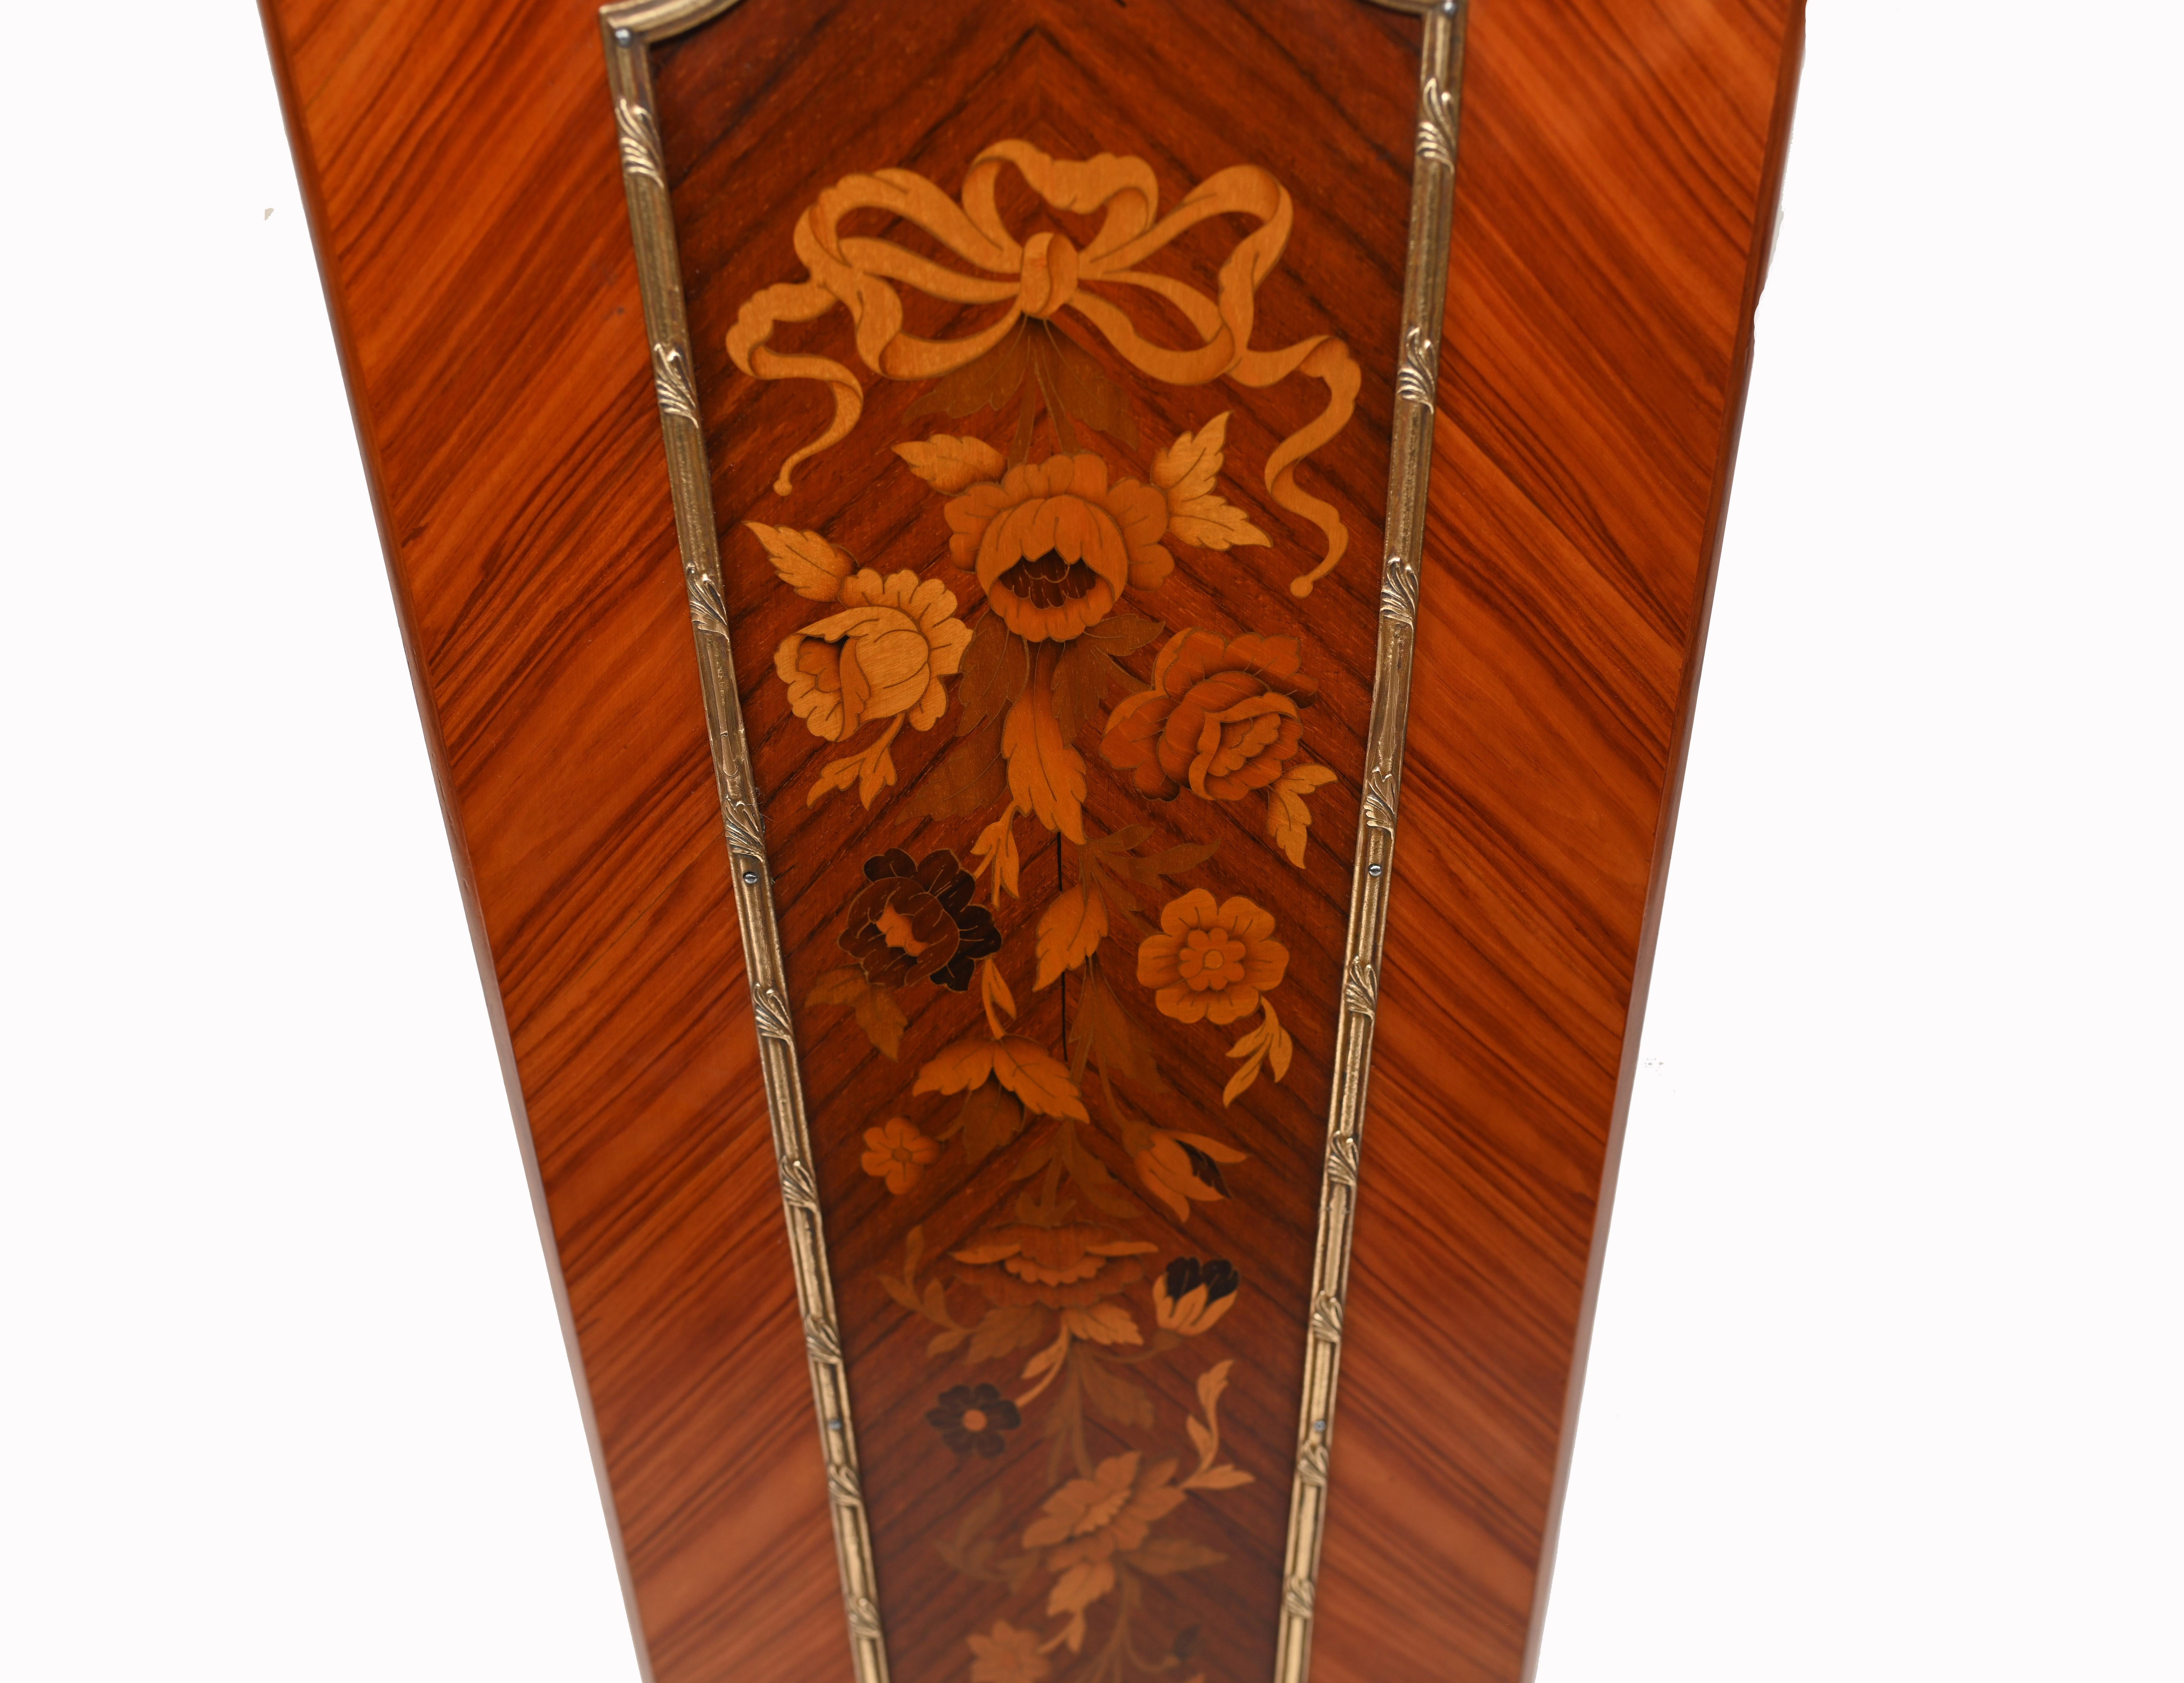 Eye catching Italian Tiffany clock on a pedestal stand
Stand is actually a glass fronted cabinet that opens out
Piece is circa 1910 and the clock chimes
Intricate floral marquetry inlay on all surfaces
Bought from a dealer on Marche Biron at